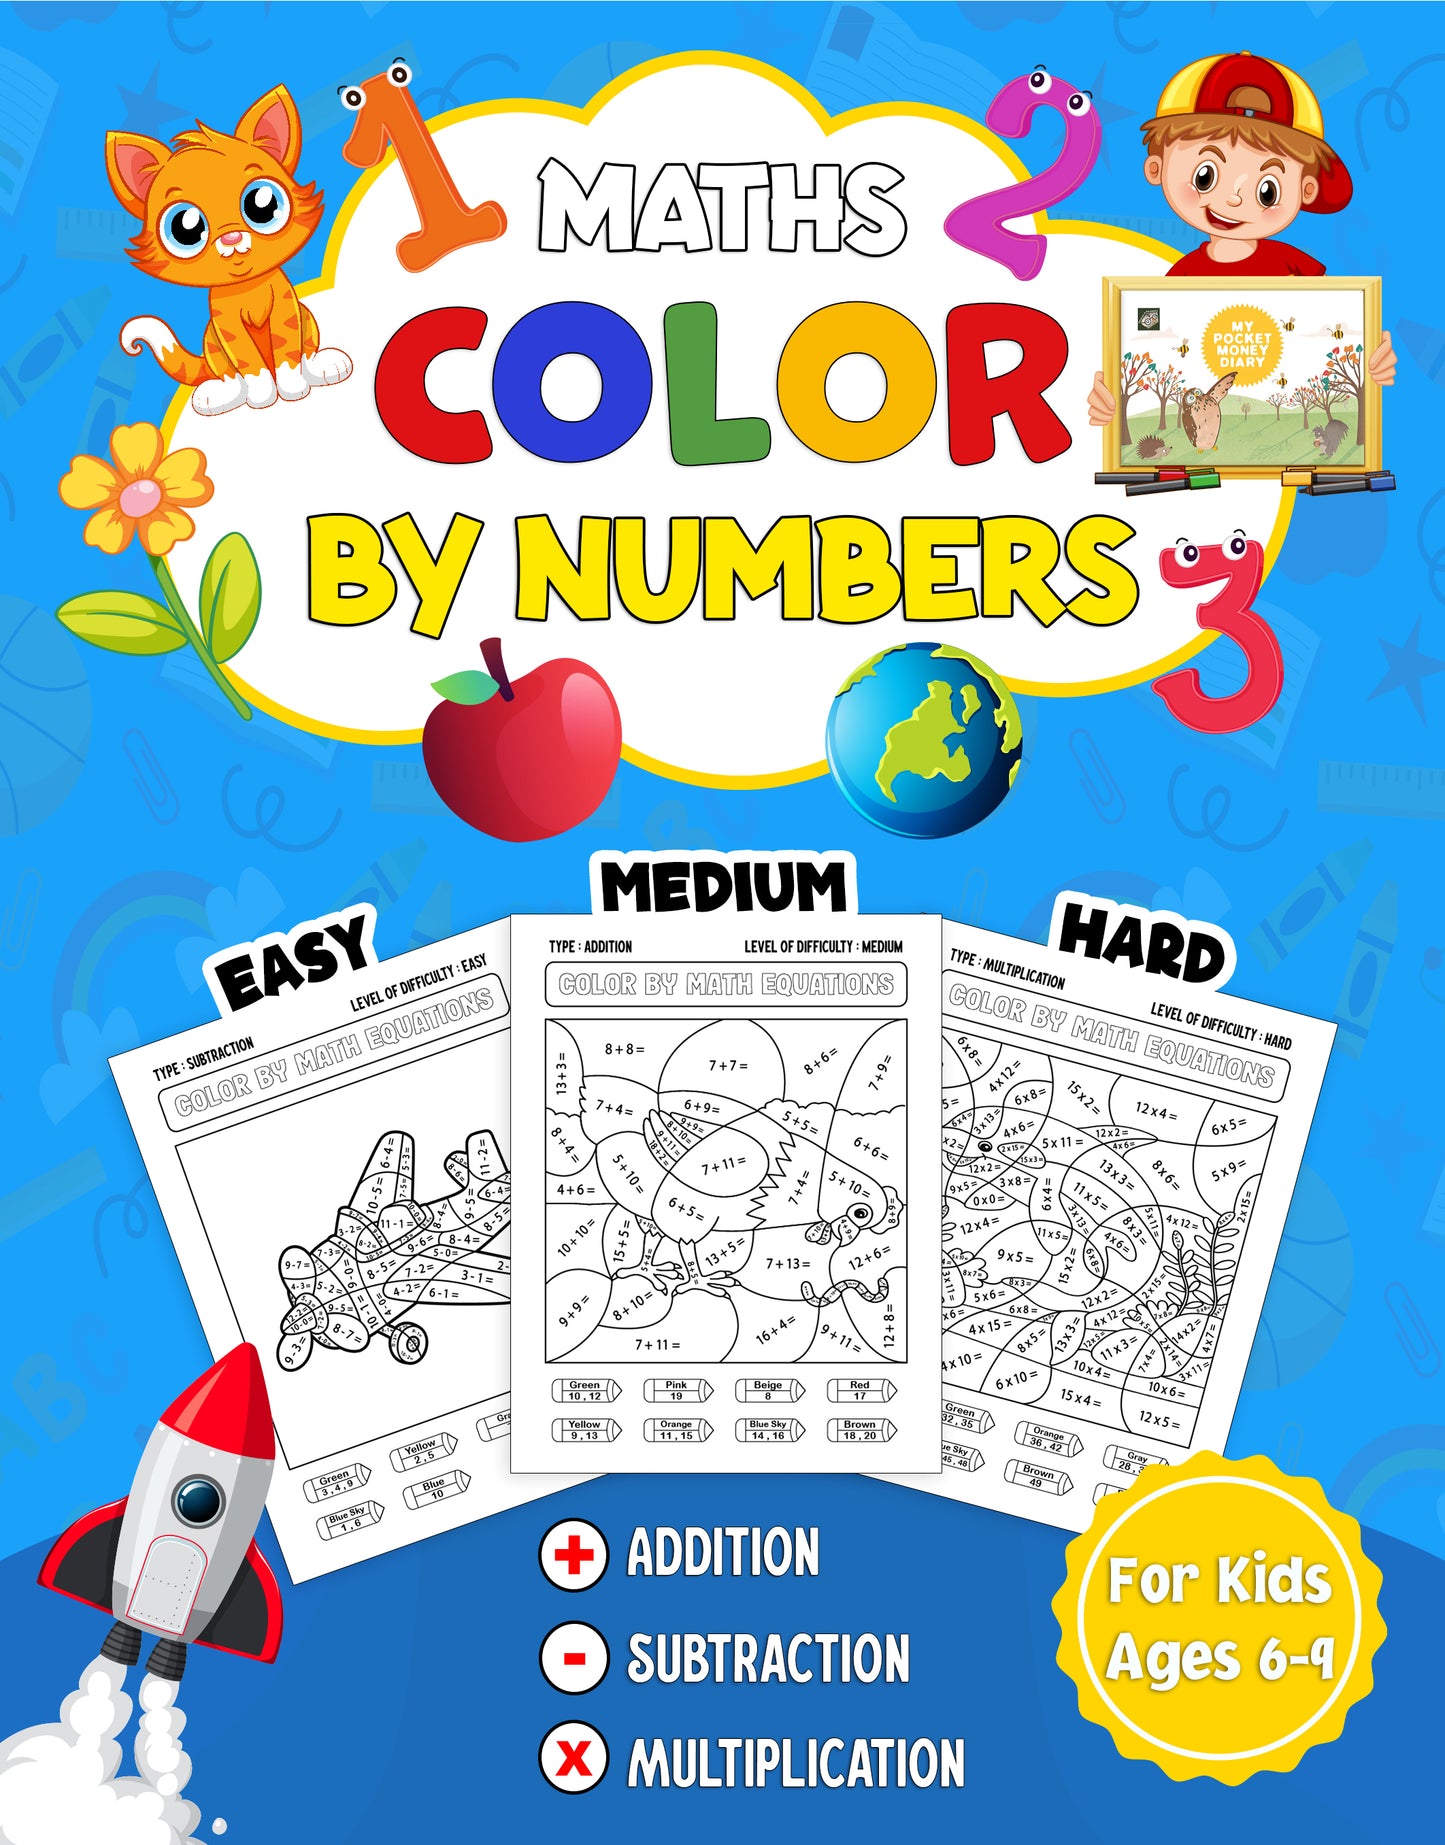 Color-By-Number (Maths)